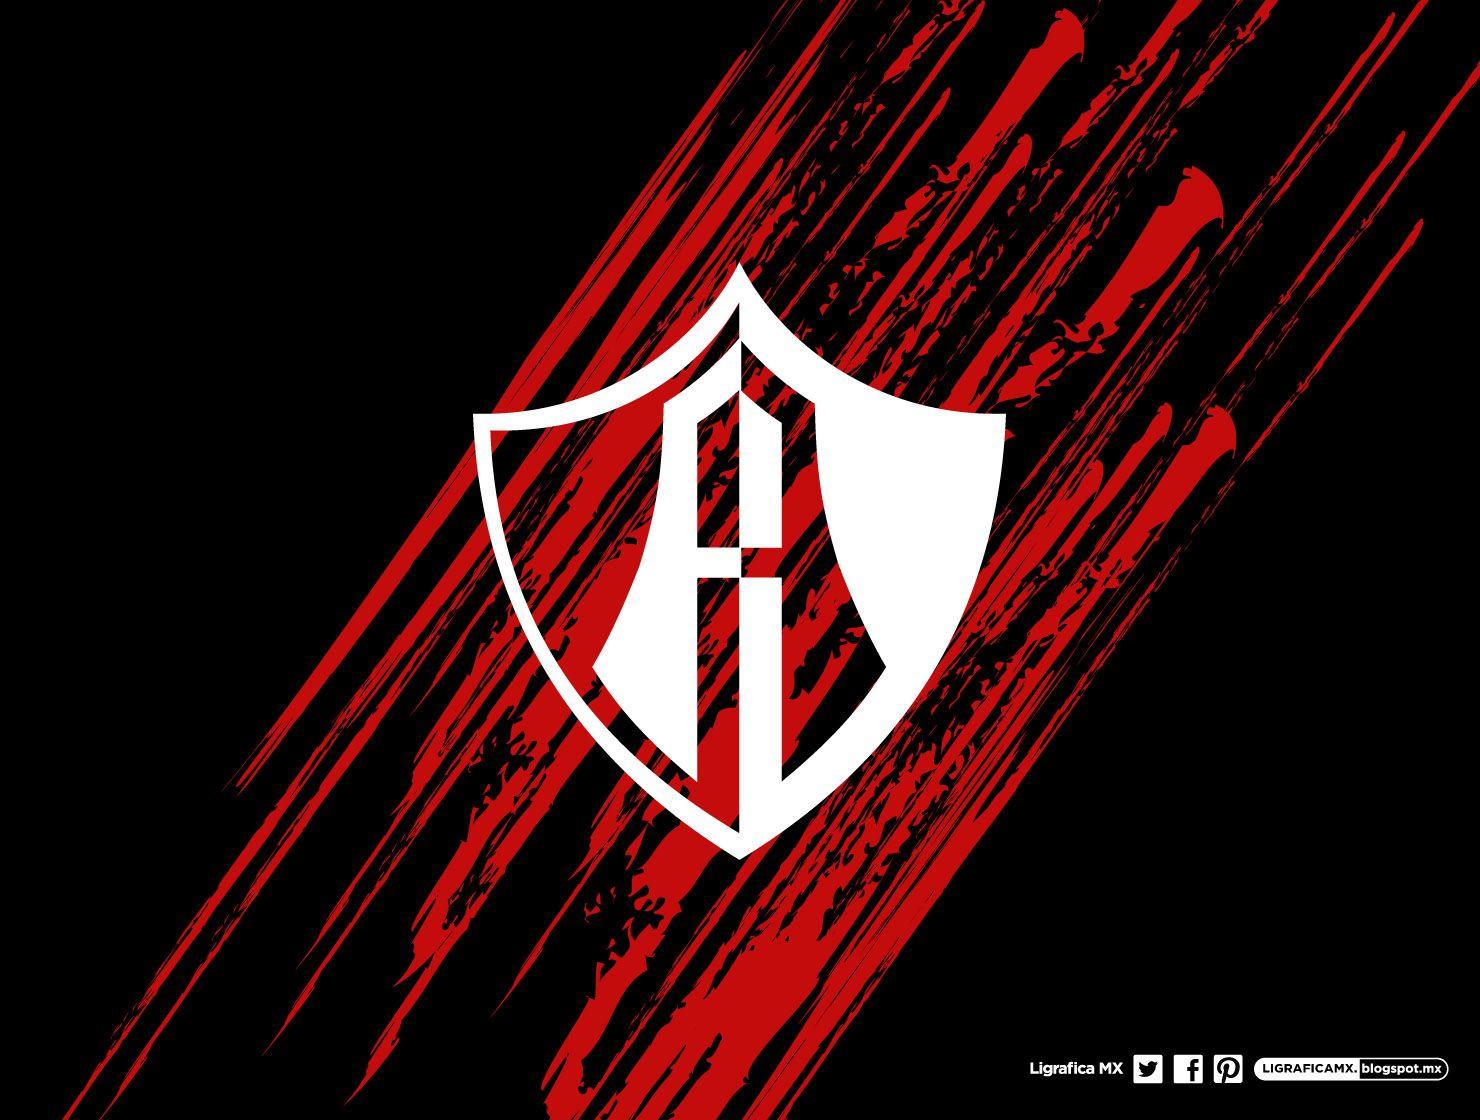 Download wallpapers Atlas FC Club Atlas Mexican football club red metal  texture metal logo emblem Guadalajara Mexico Liga MX creative art  football for desktop with resolution 2560x1600 High Quality HD pictures  wallpapers